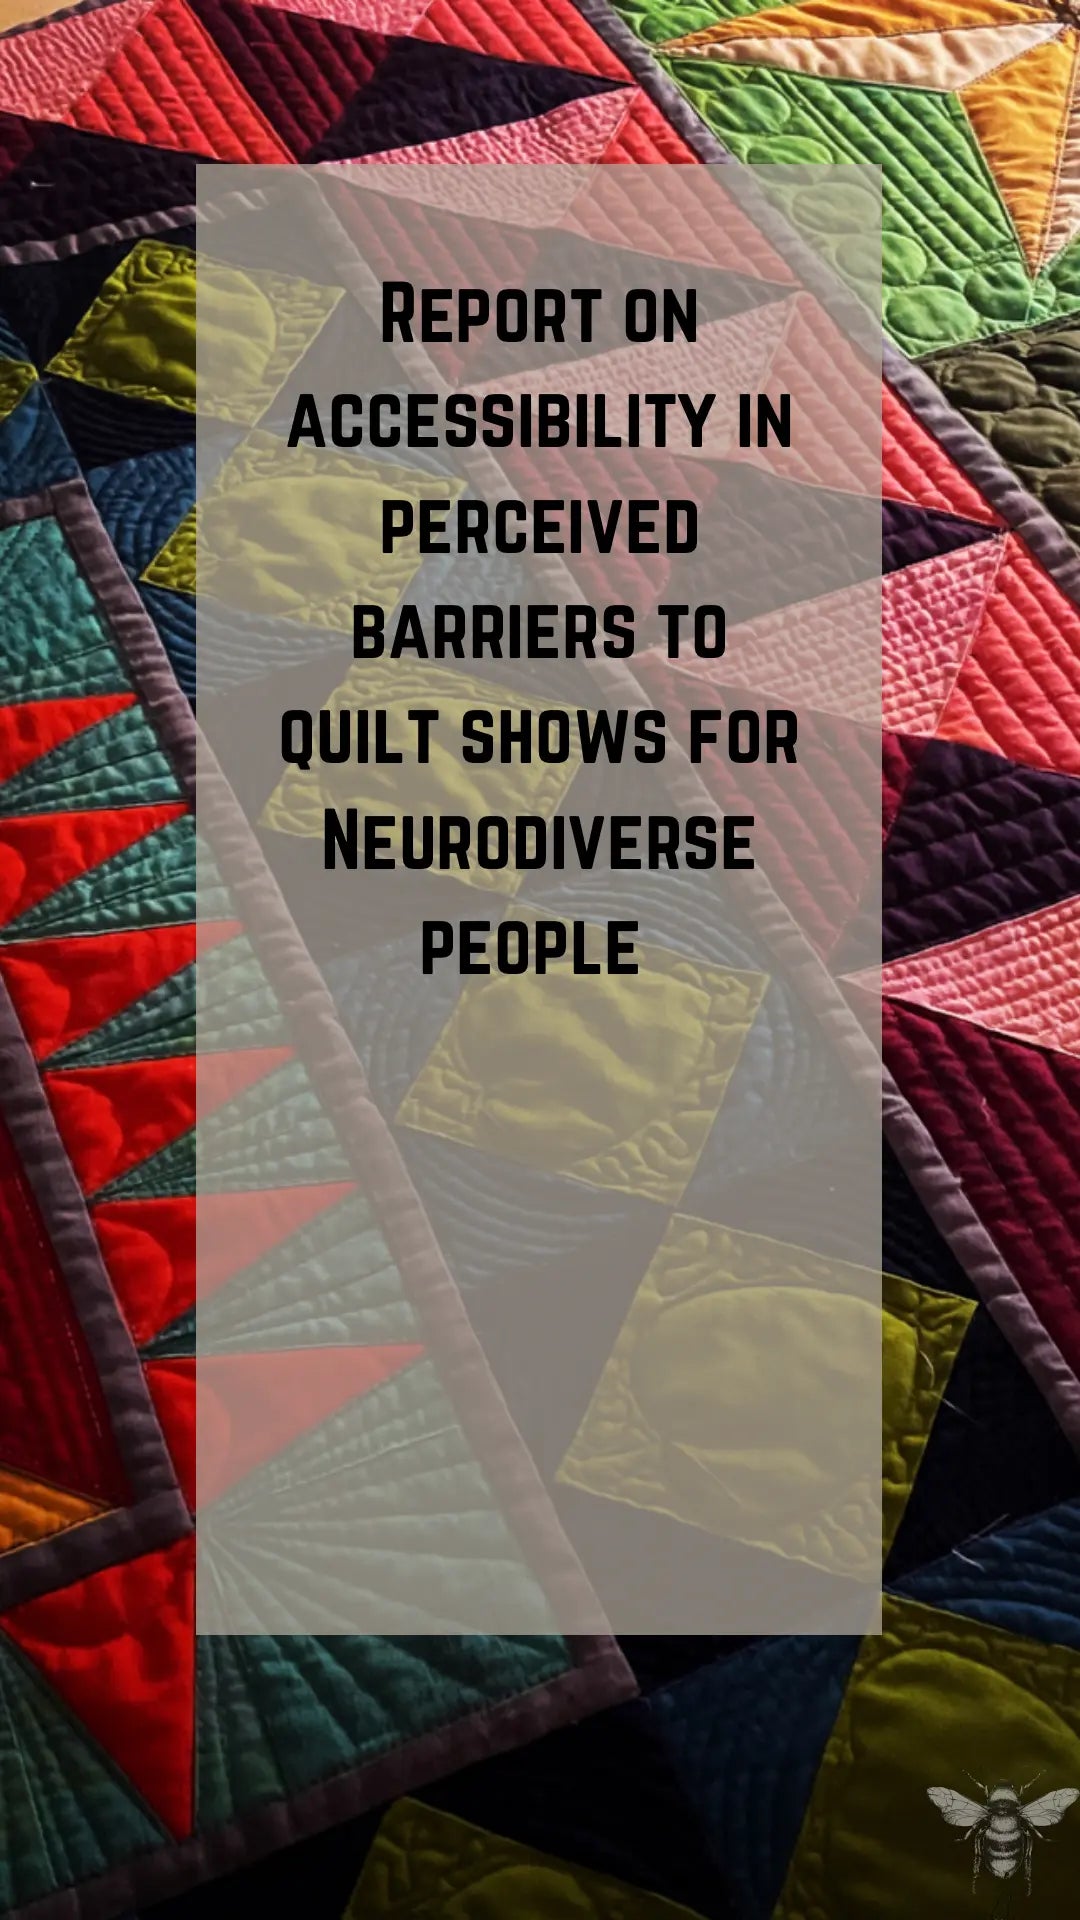 Report on Accessibility and Perceived Barriers to Quilt Shows for Neurodiverse people.